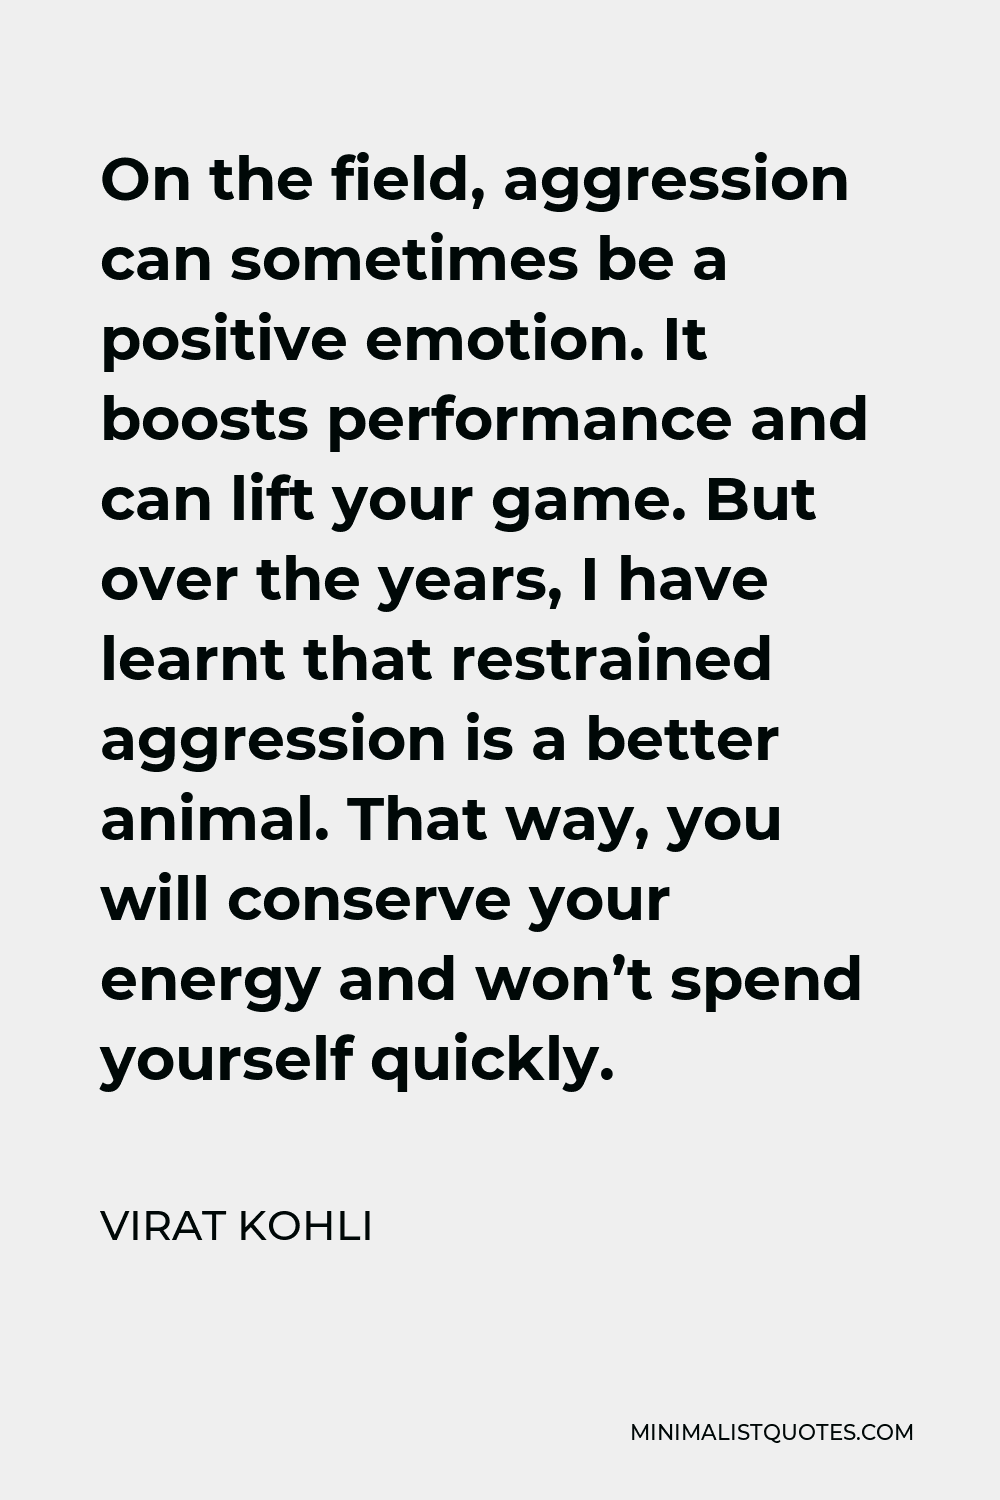 Virat Kohli Quote - On the field, aggression can sometimes be a positive emotion. It boosts performance and can lift your game. But over the years, I have learnt that restrained aggression is a better animal. That way, you will conserve your energy and won’t spend yourself quickly.